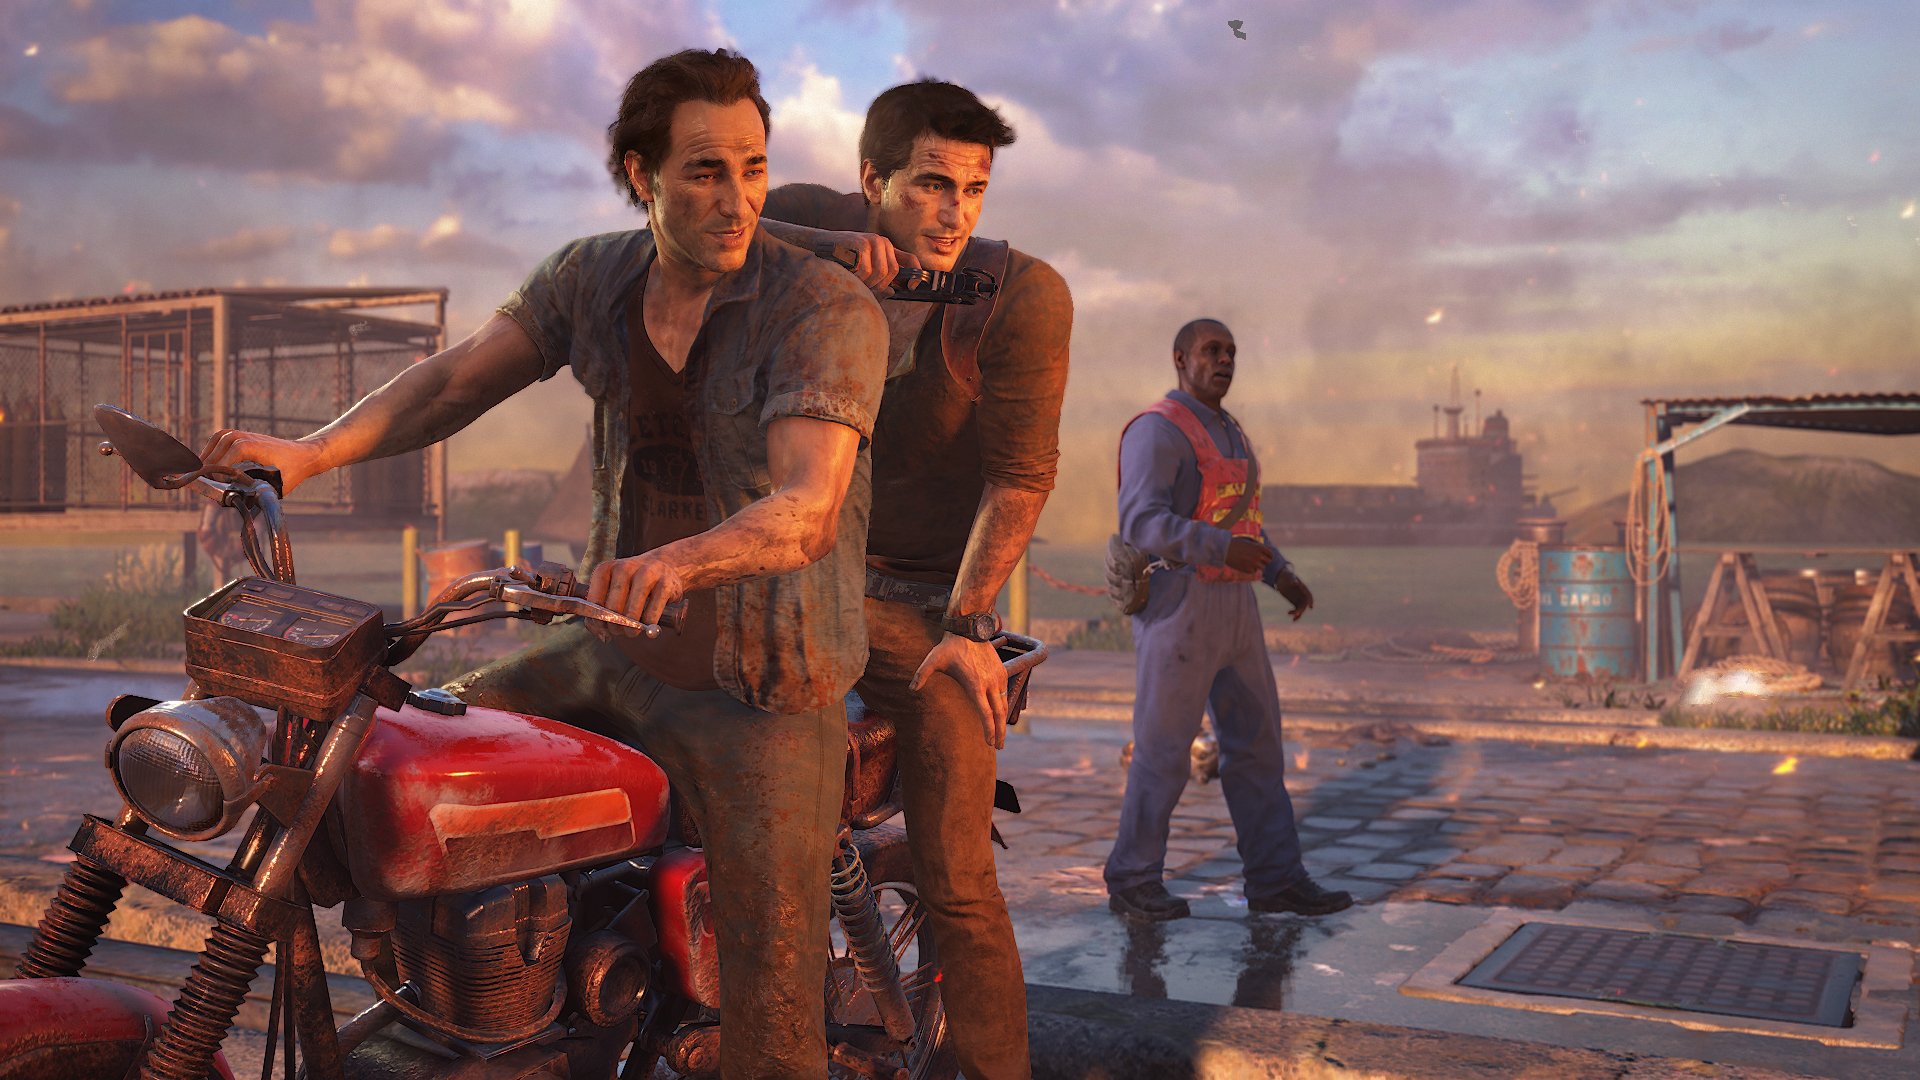 Uncharted protagonist Nathan Drake sitting on a motorbike with his brother